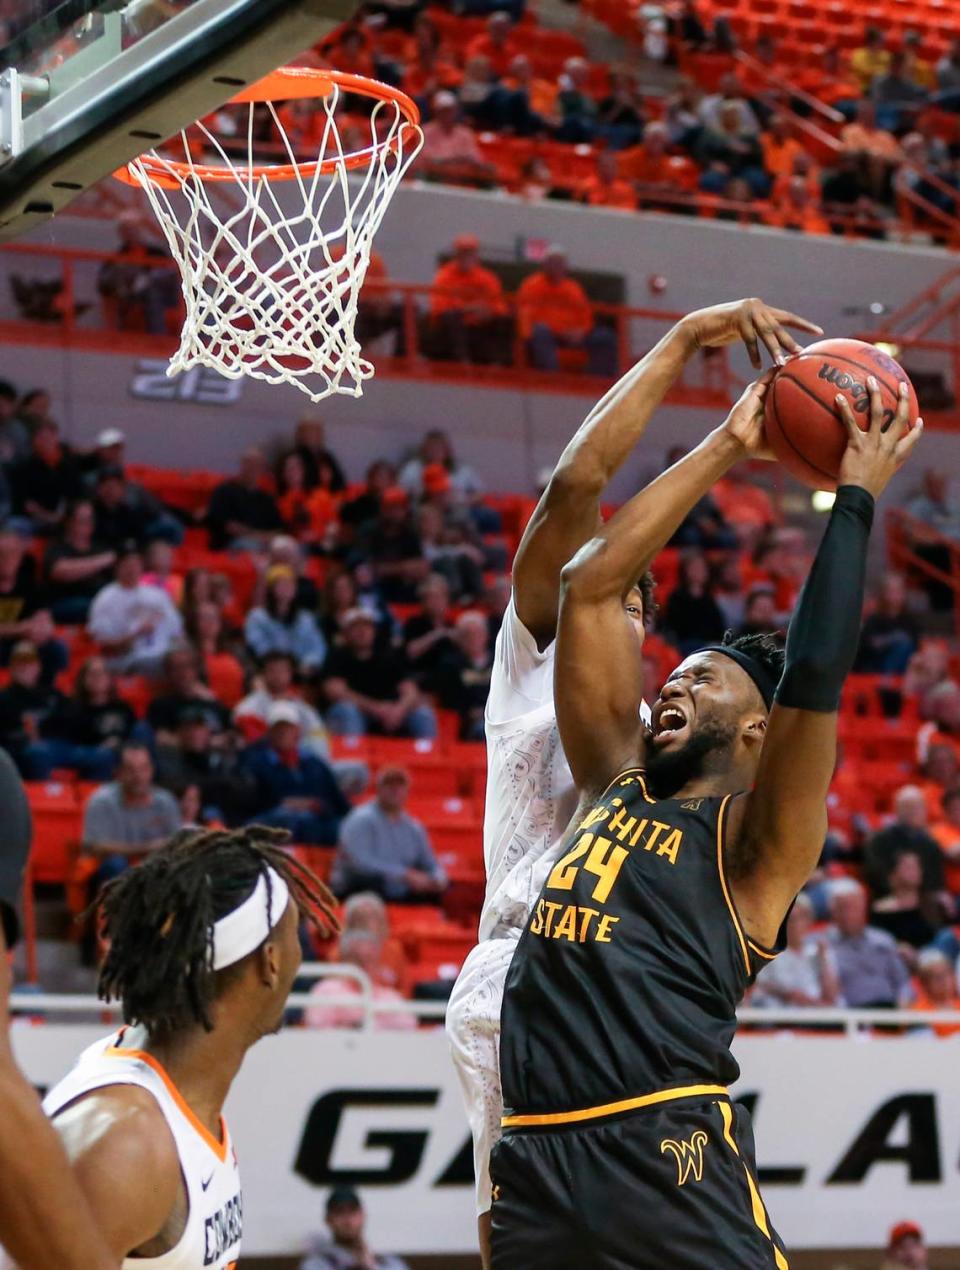 Wichita State’s Morris Udeze goes to the basket against Oklahoma State during the second half on Wednesday in Stillwater.